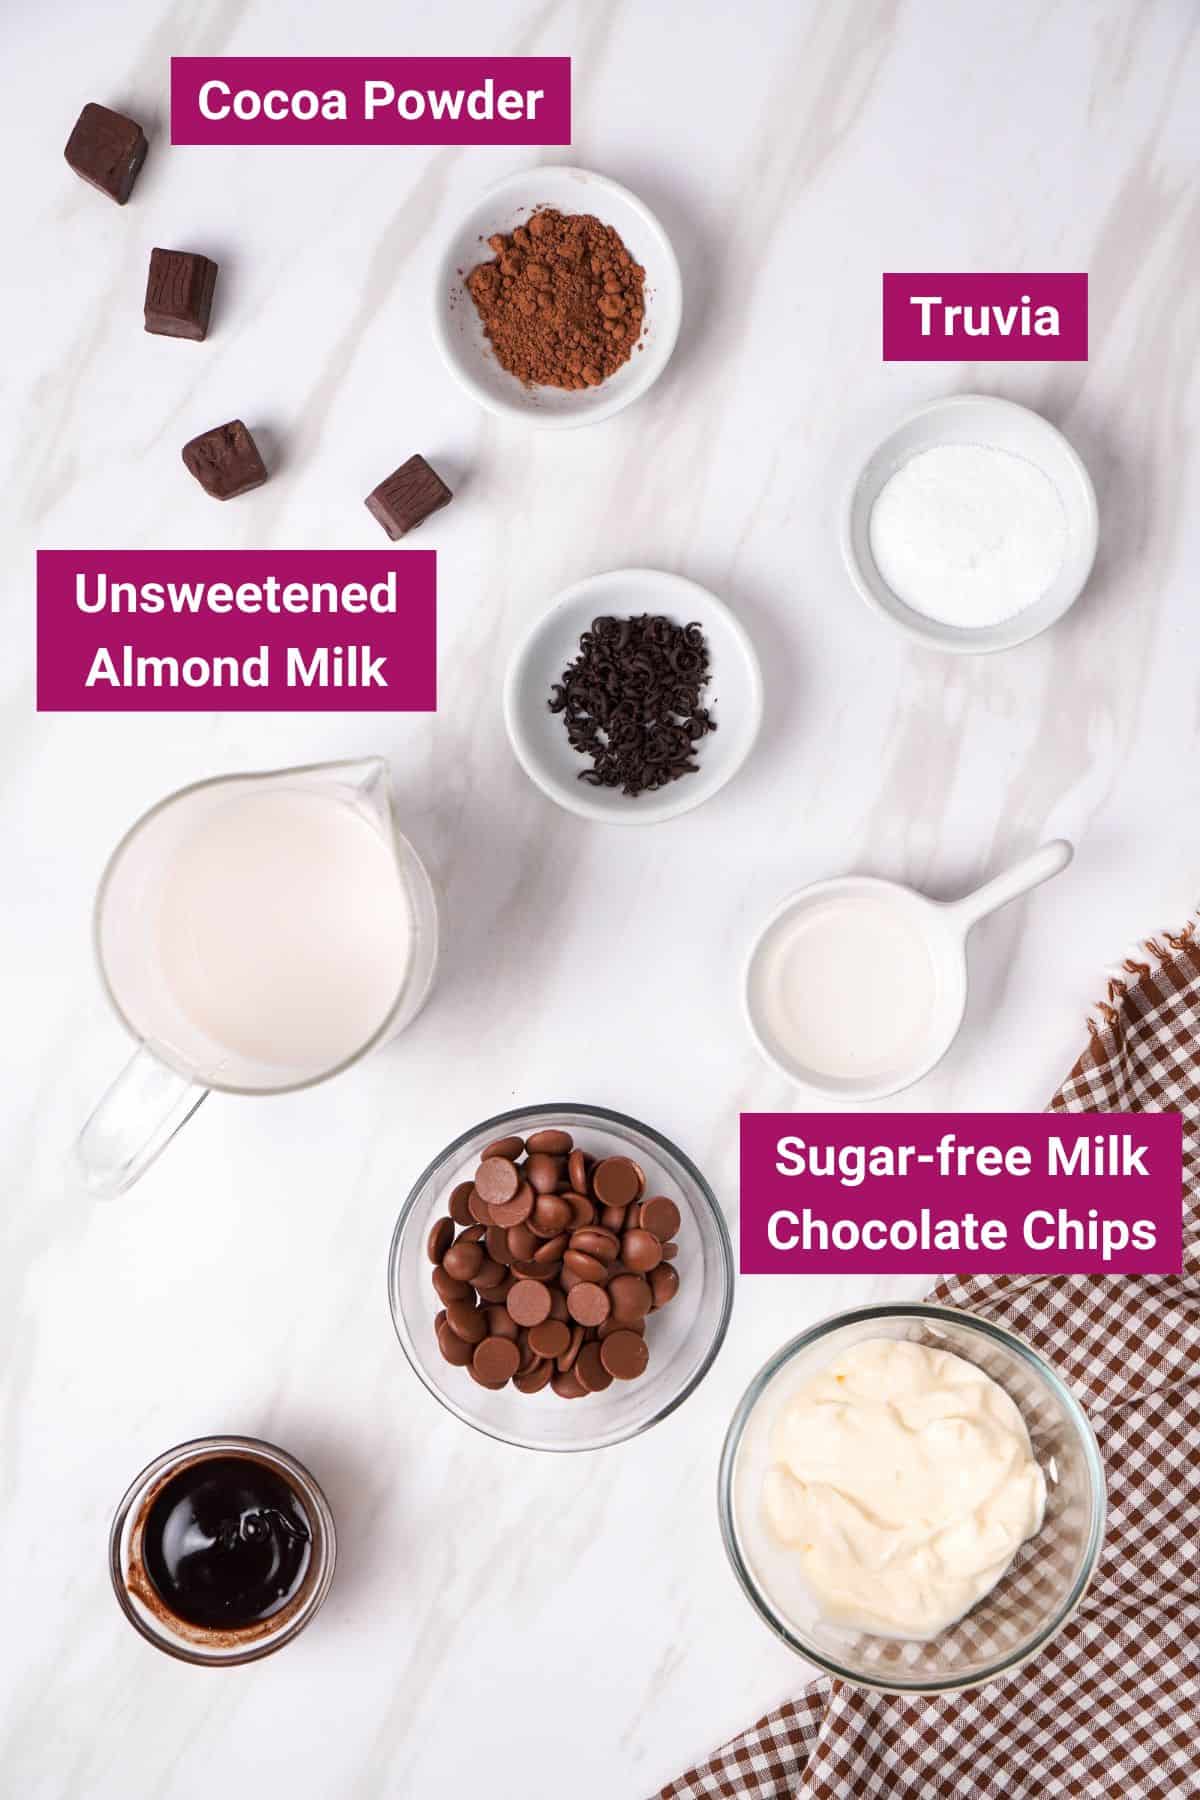 ingredients needed to make keto hot chocolate: unsweetened almond milk, sugar free choco chips, truvia and cocoa powder on separate bowls